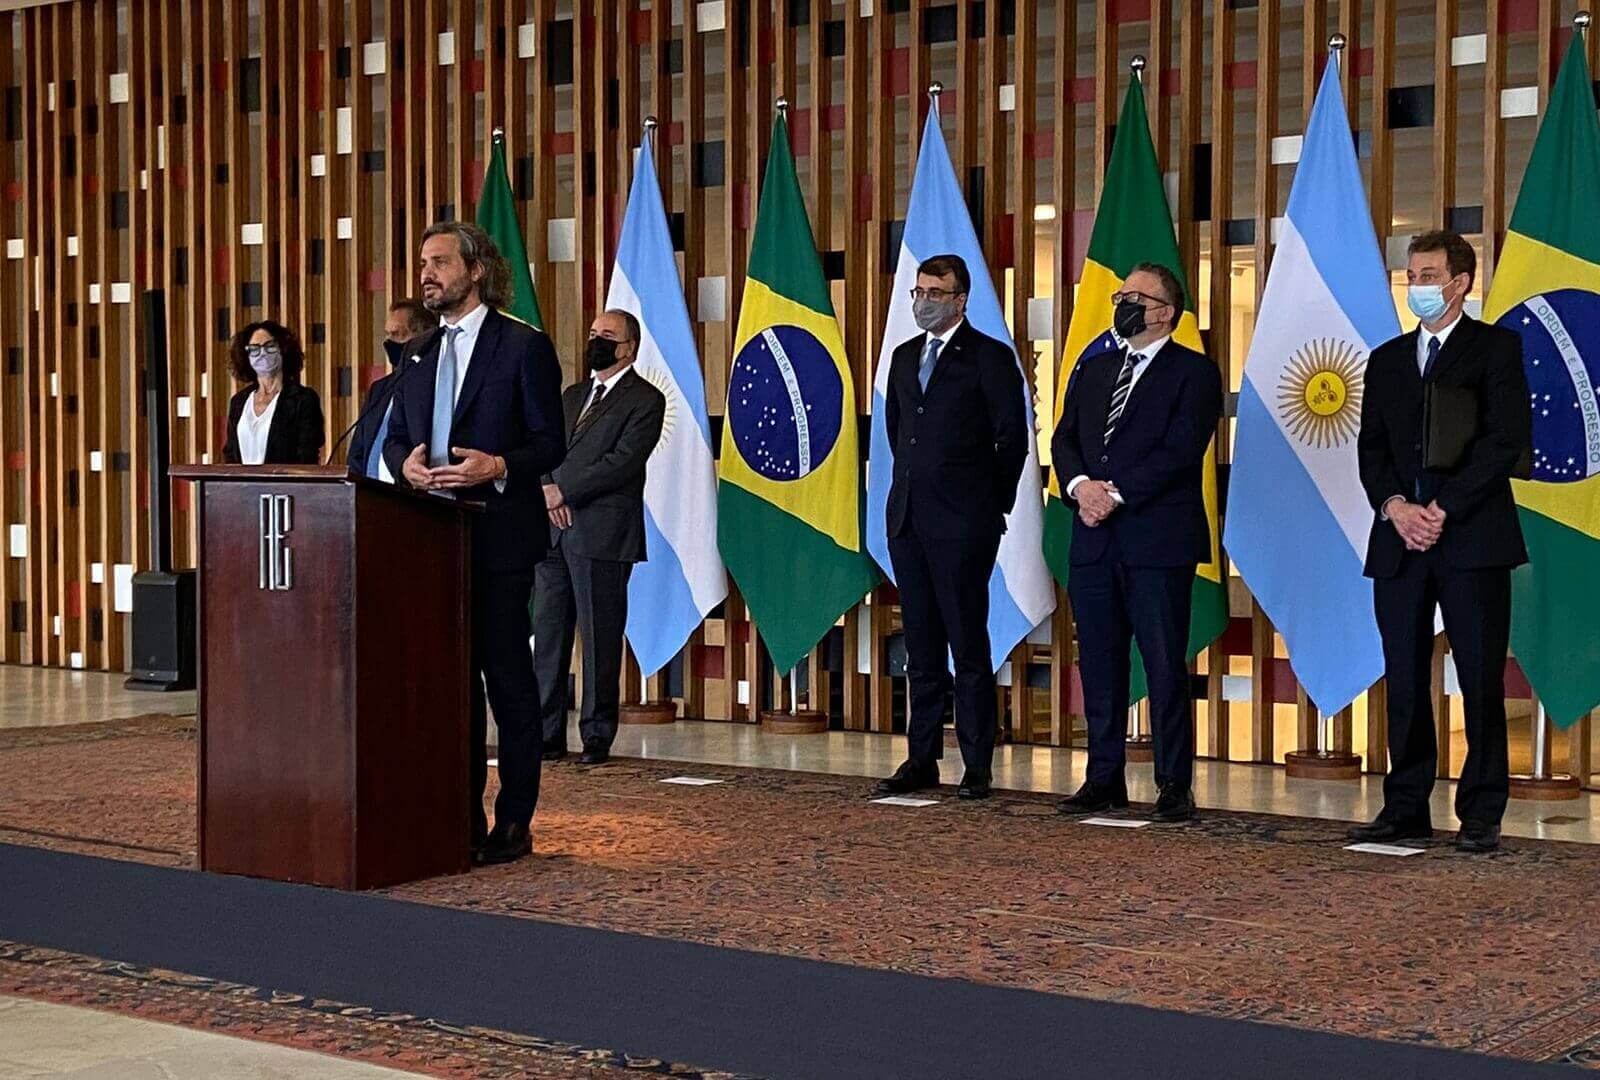 Brazil, Argentina Agree to Reduce Mercosur Common External Tariff by 10%